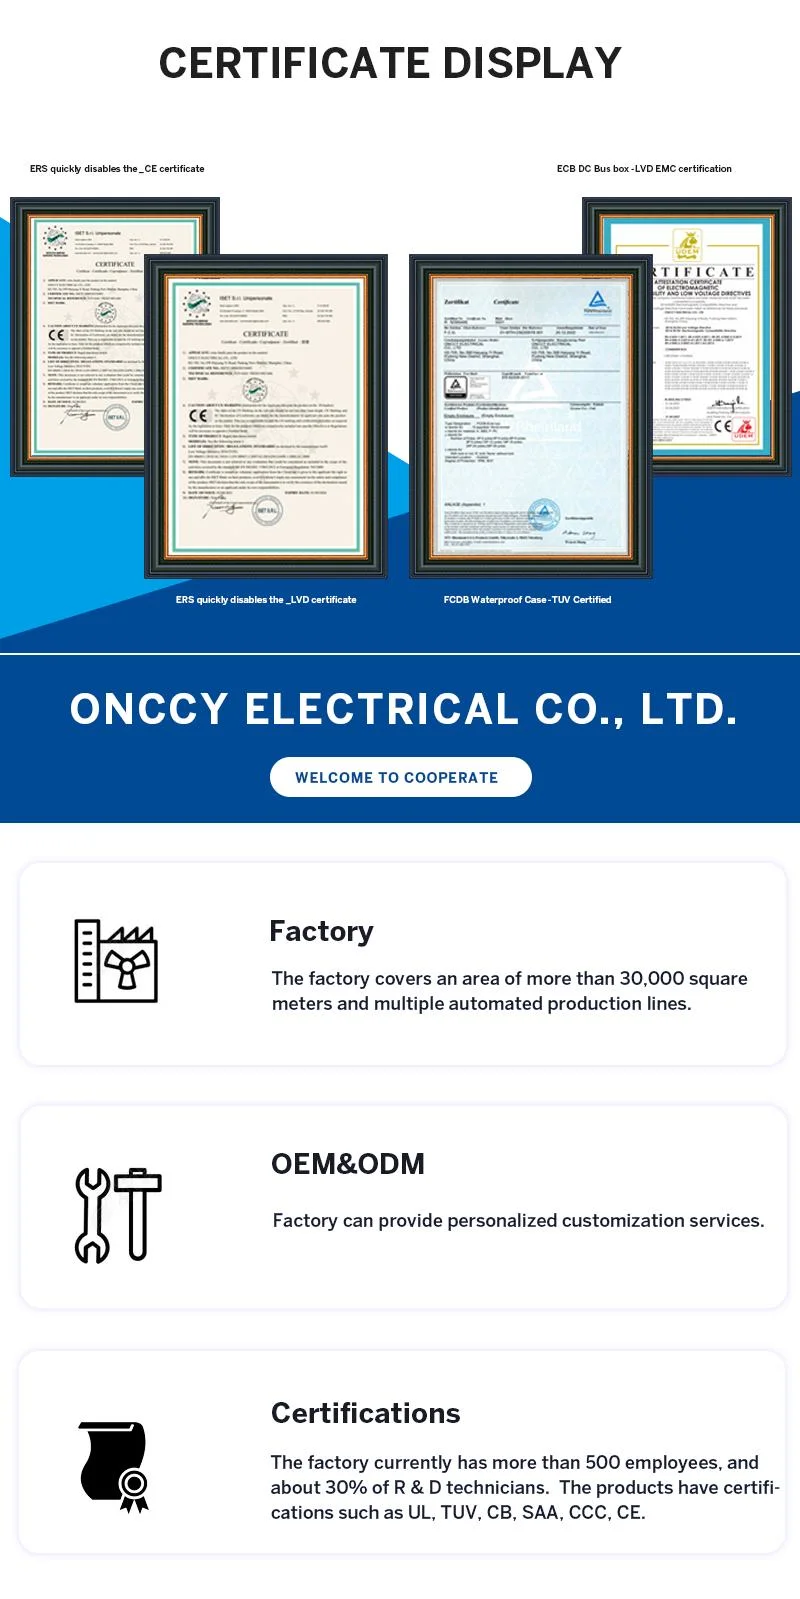 Onccy Indoor/Outdoor Electric 2p 4p DC Load Break Isolating Switch 315A 800A PV Isolating Switch